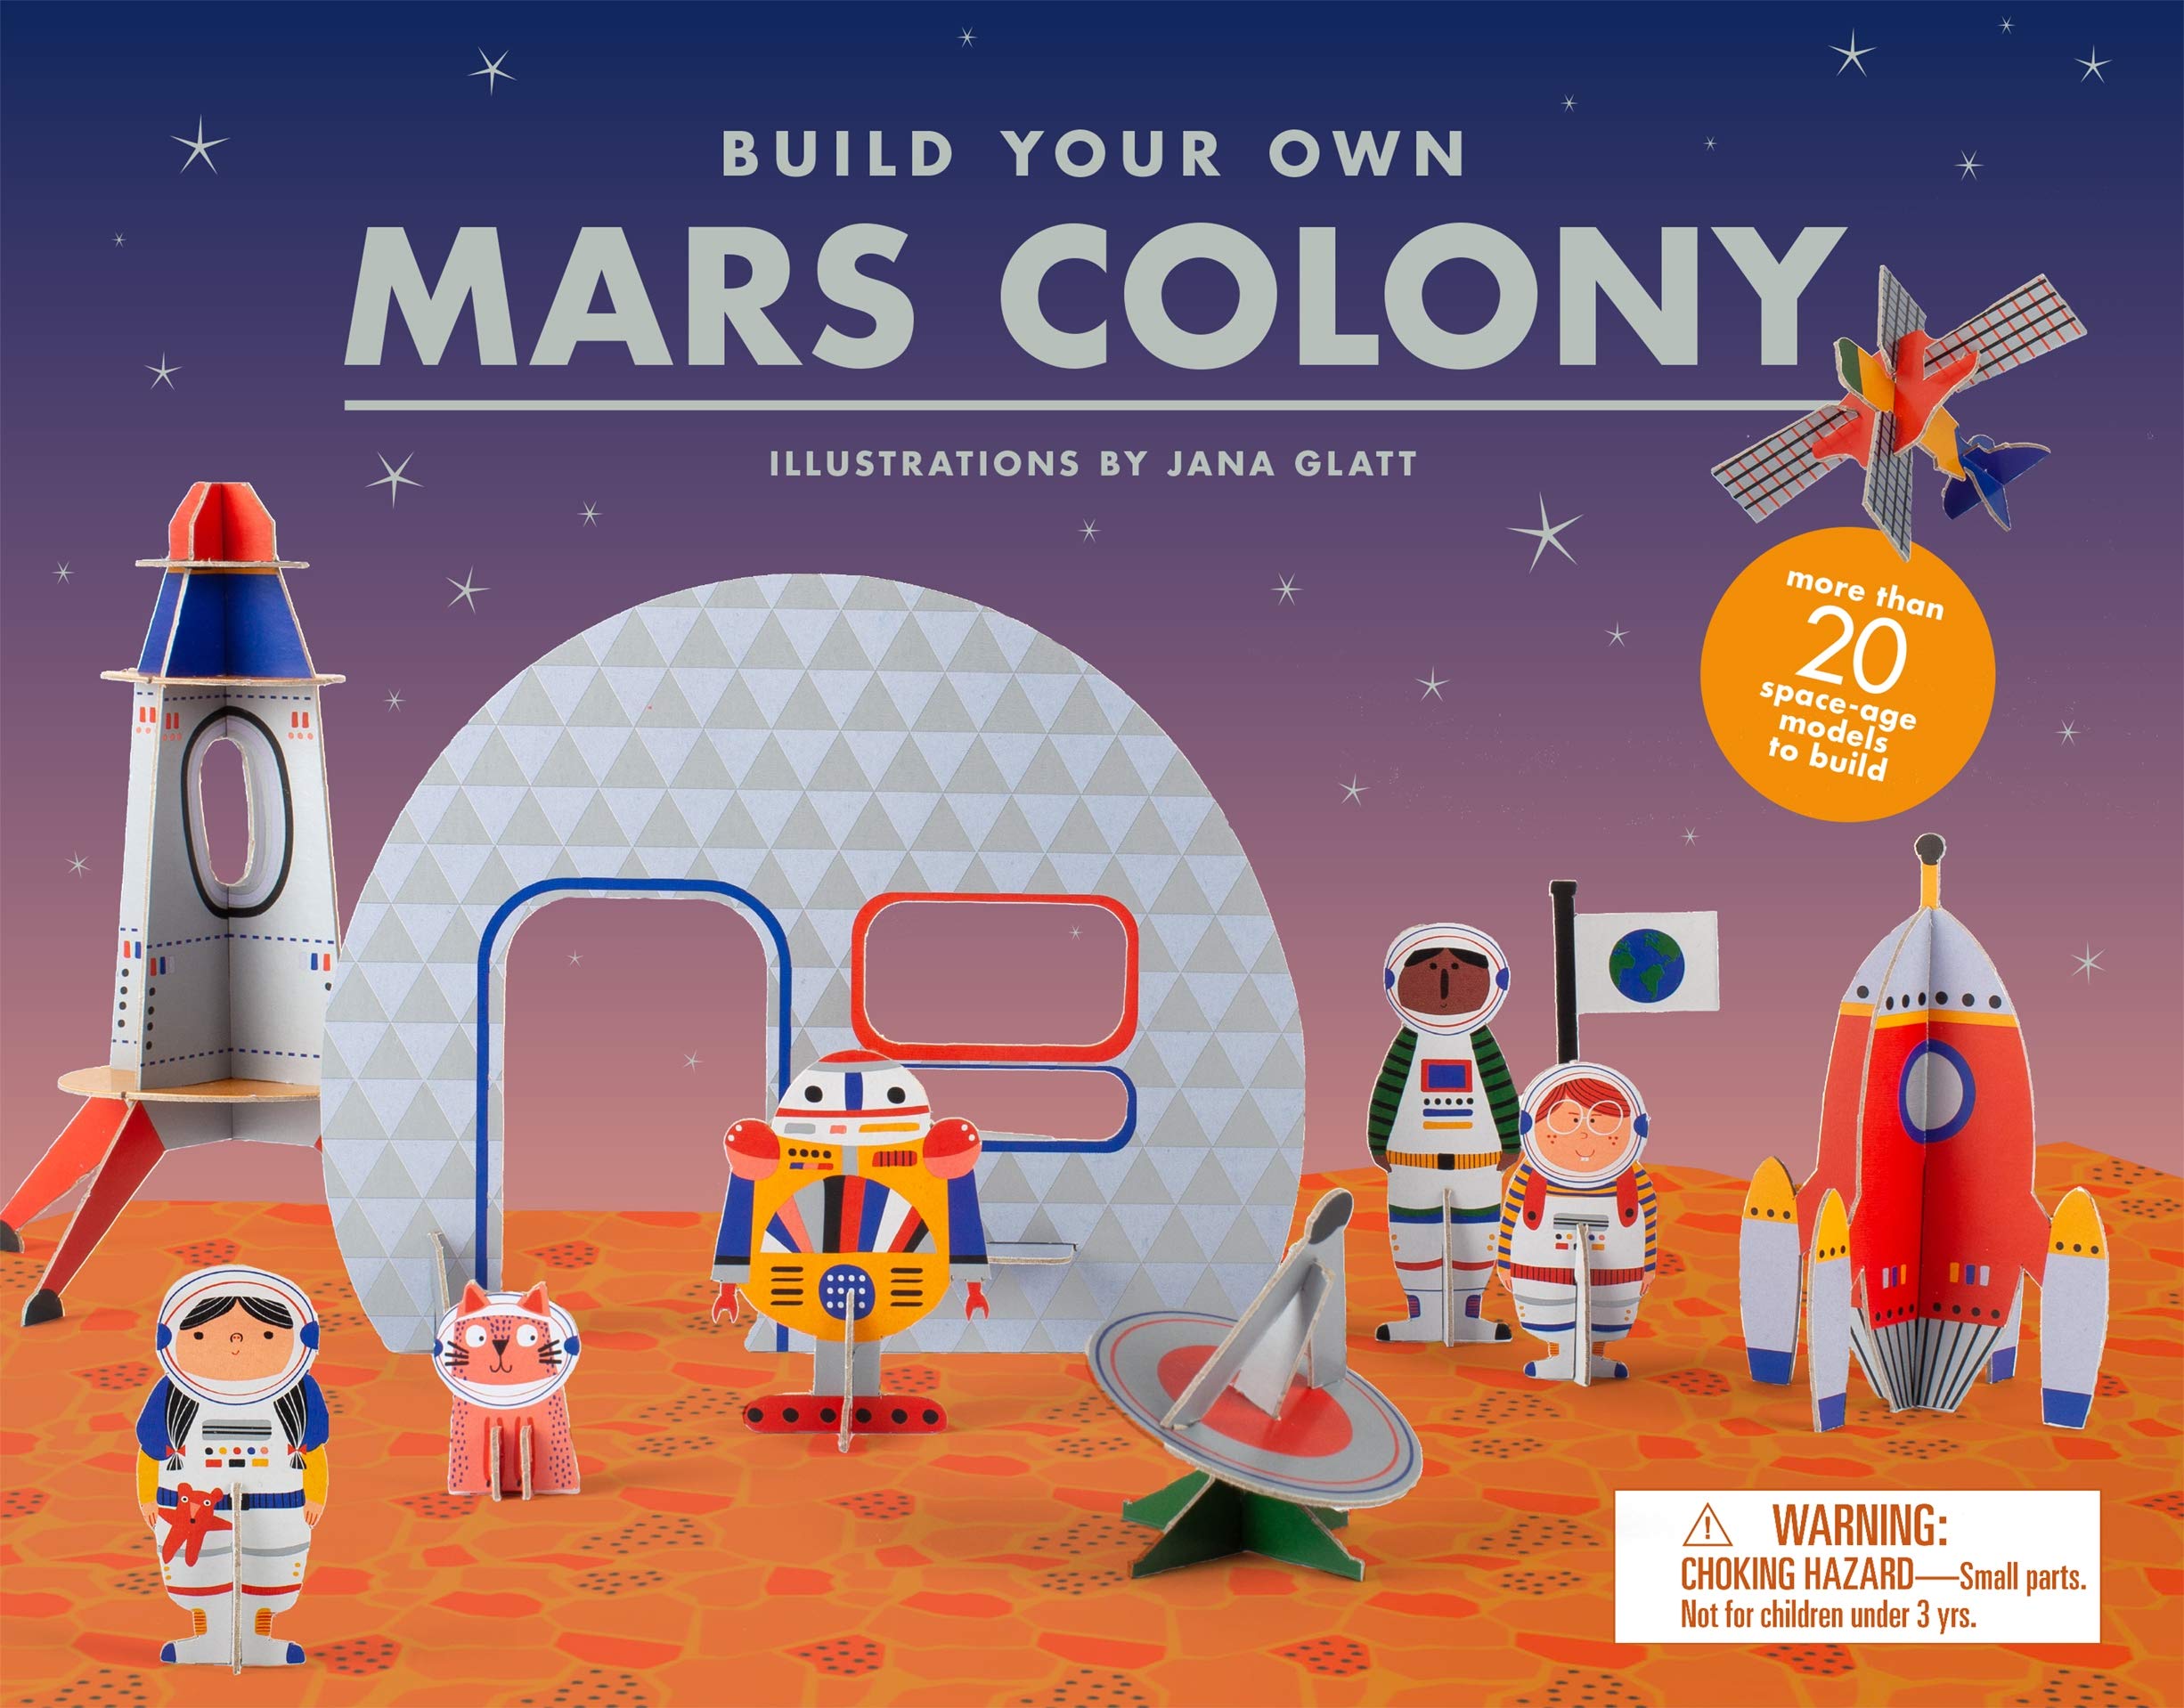 Build Your Own Mars Colony | Laurence King Publishing